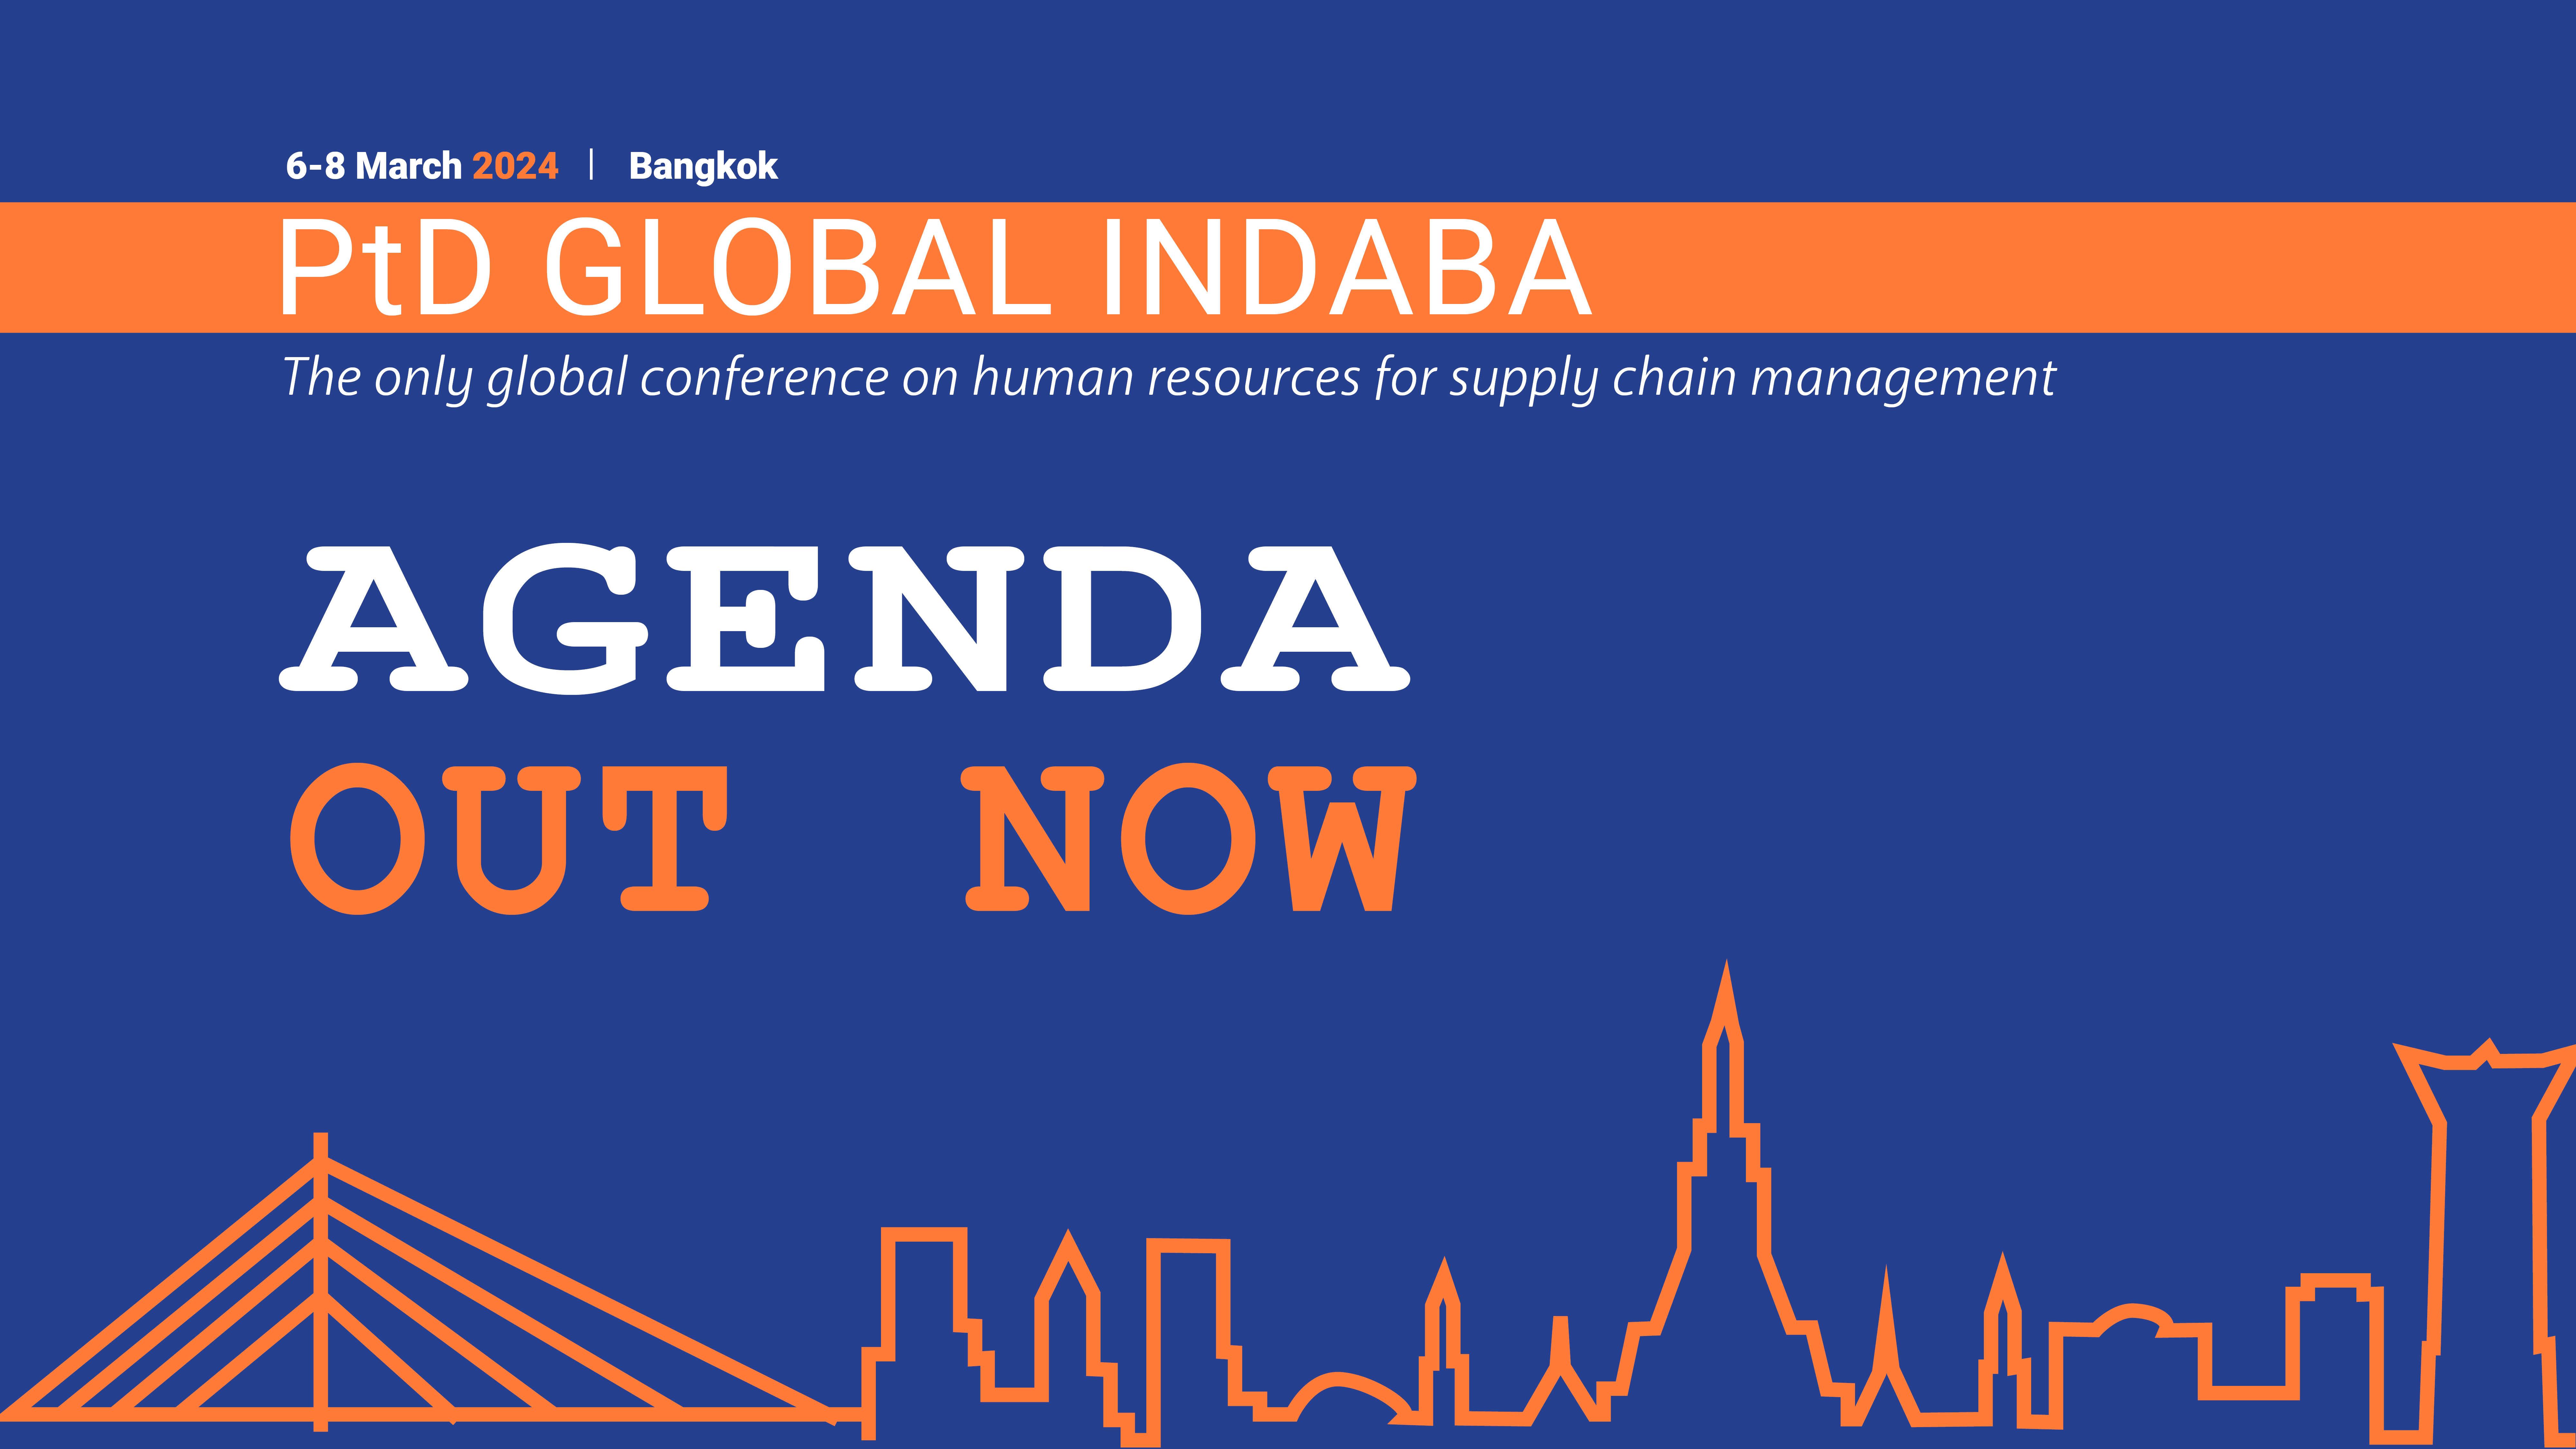 PtD Global Indaba: Agenda out now